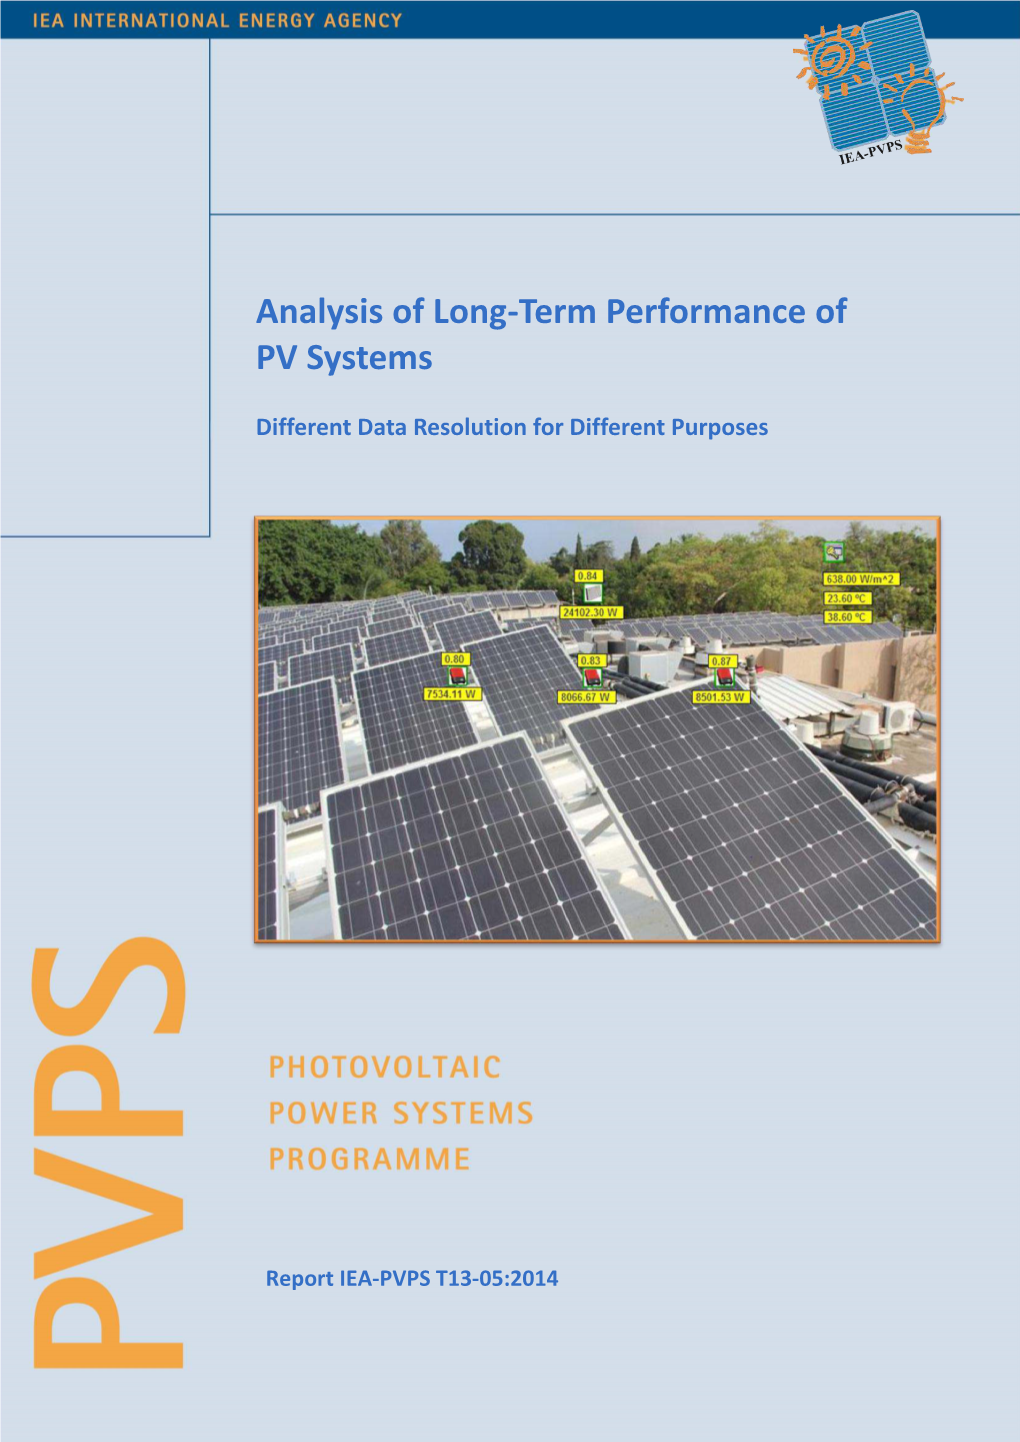 Lessons Learnt from the Analytical Monitoring of Photovoltaic Systems